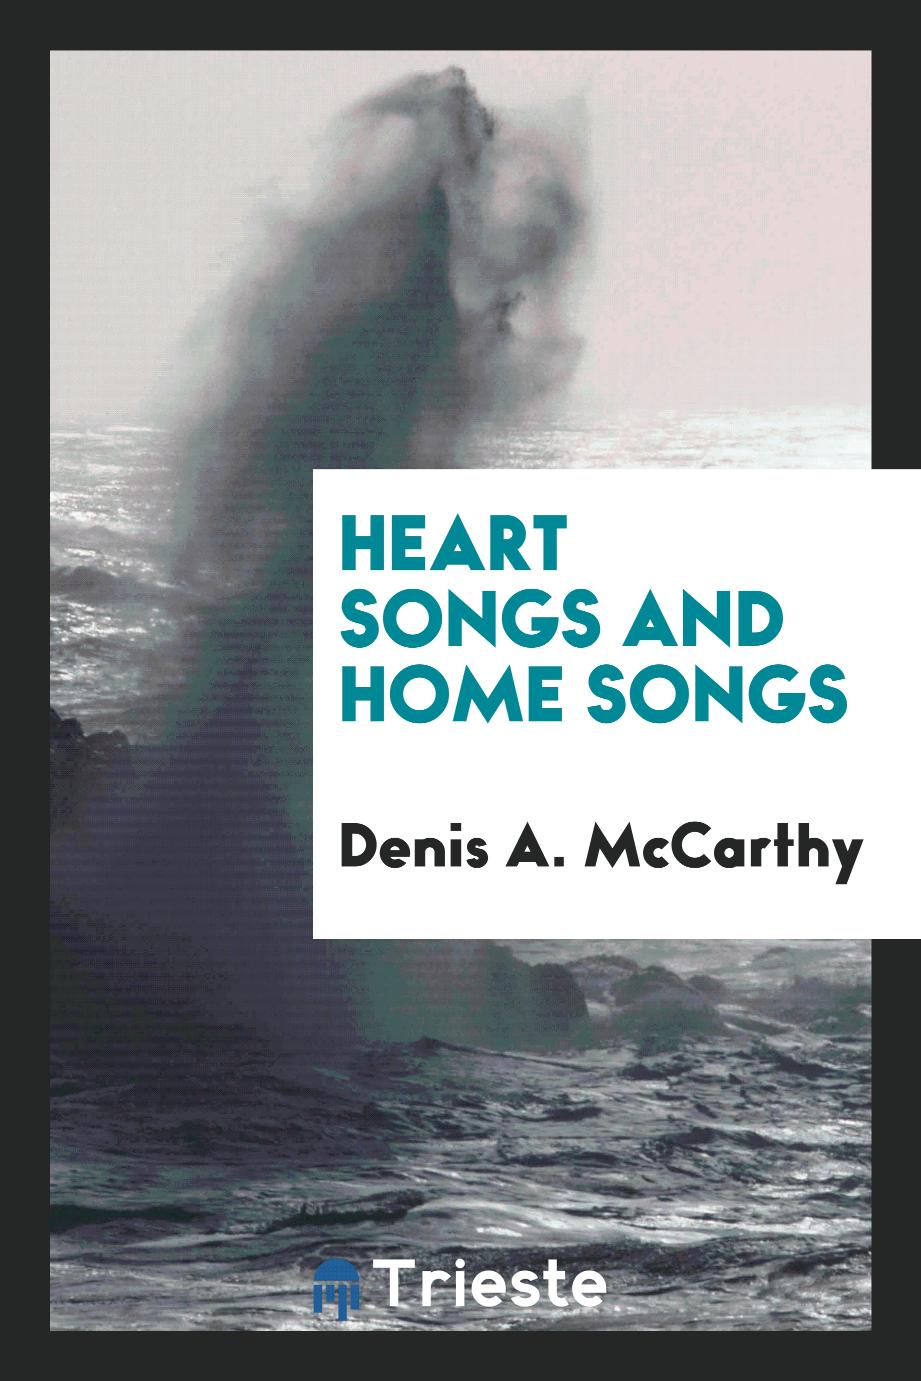 Heart Songs and Home Songs